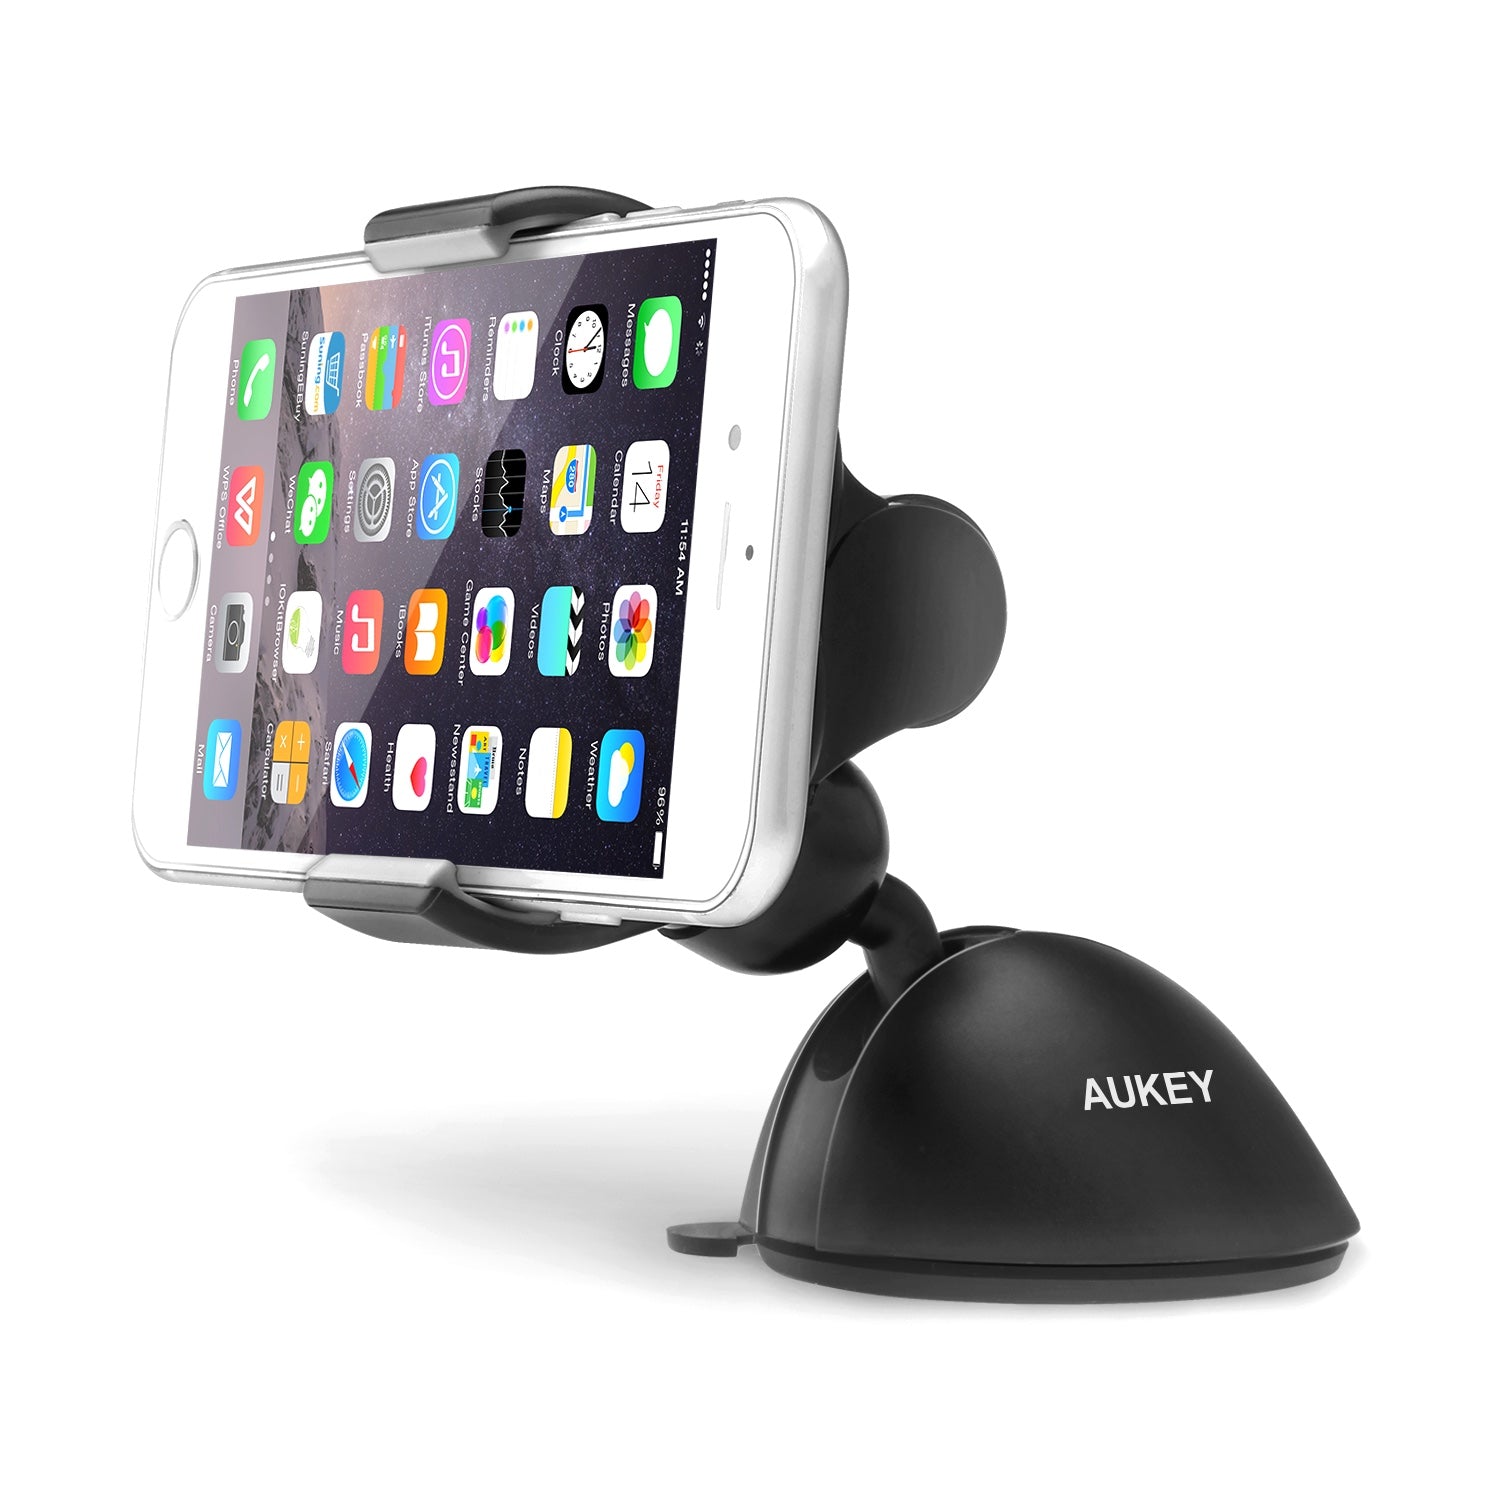 AUKEY HD-C11 Windshield Dashboard 360 Degree Rotating Universal Car Mount Holder - Aukey Malaysia Official Store